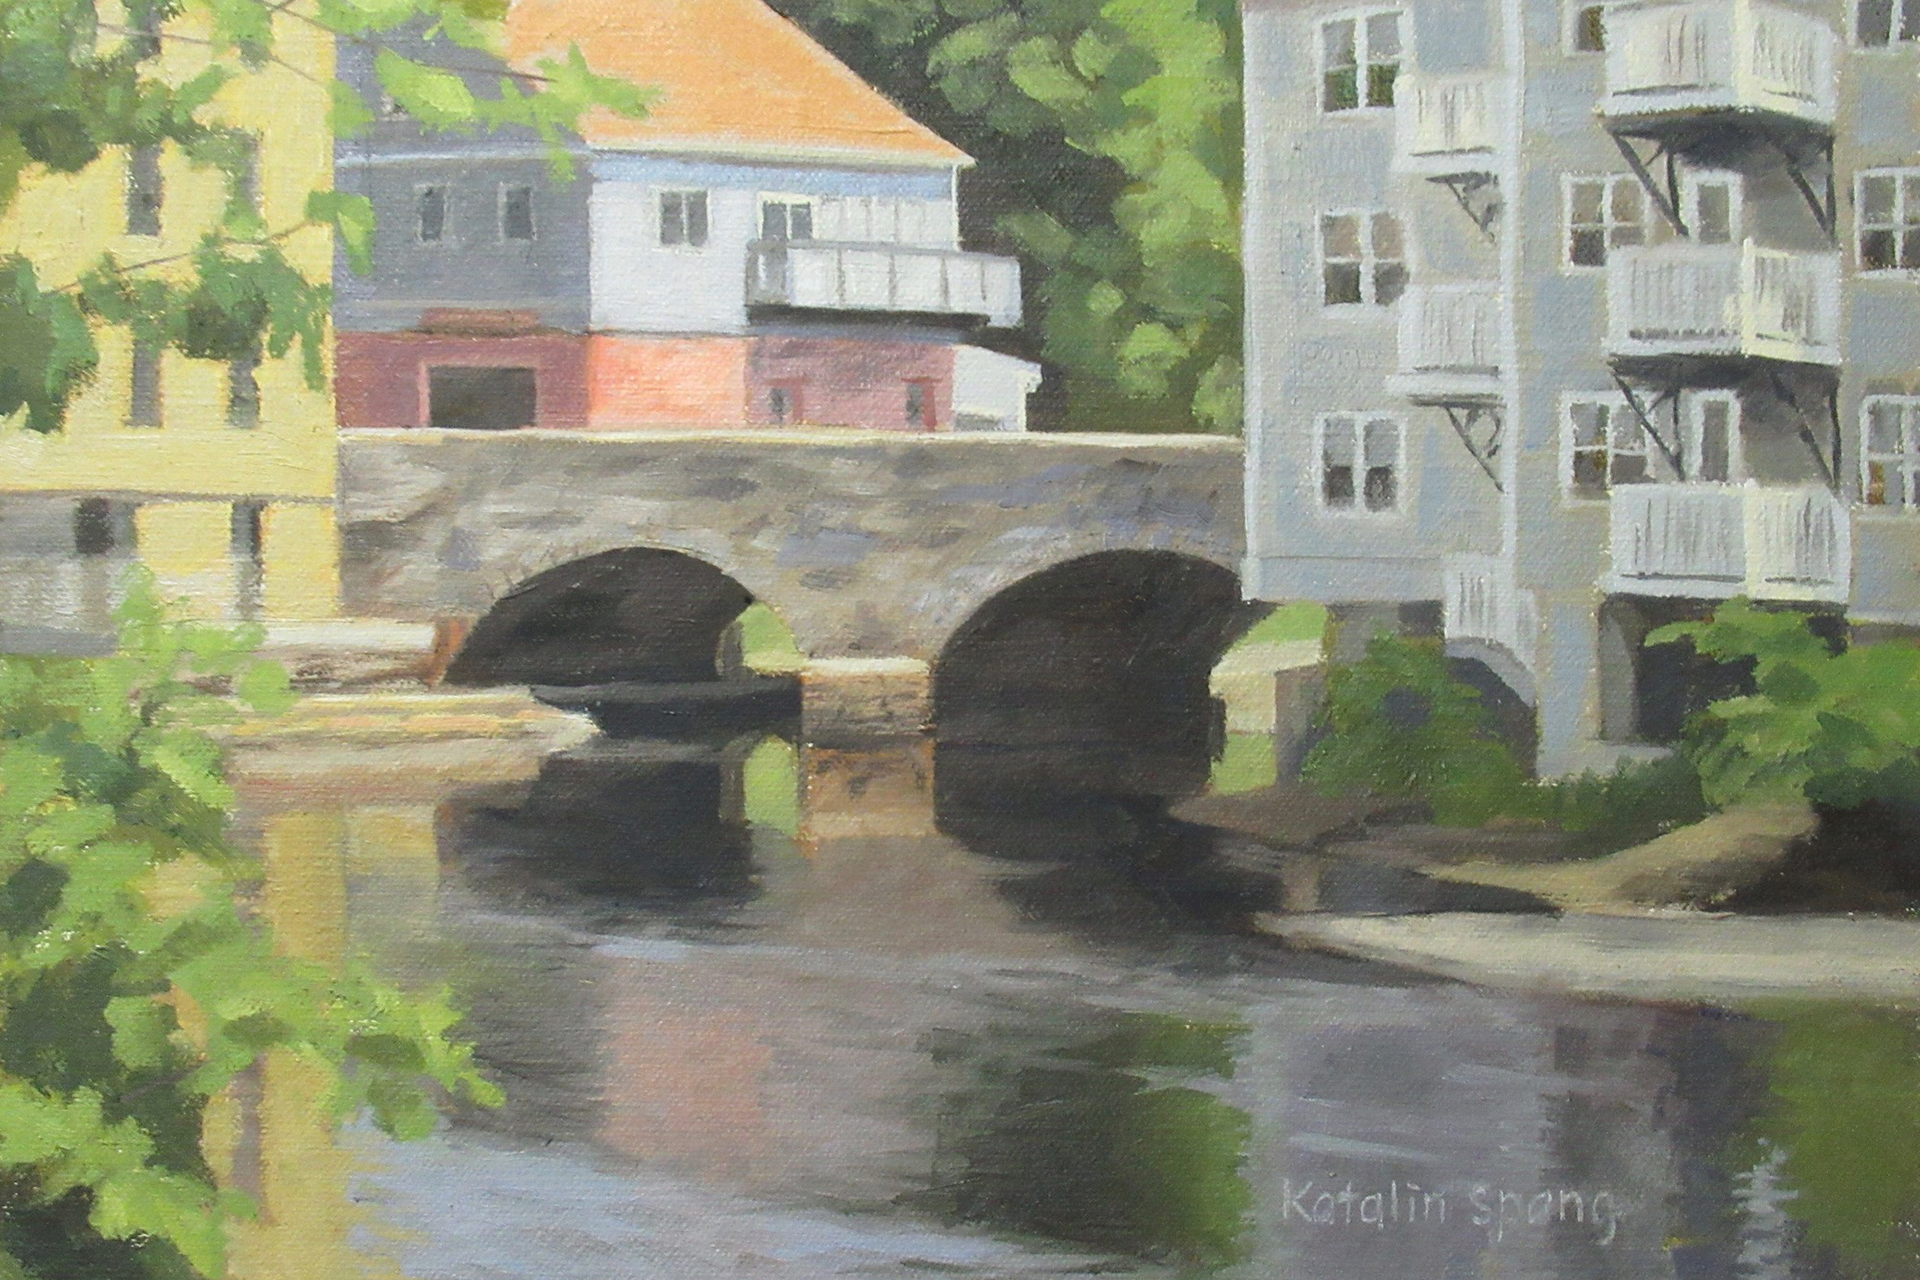 Landscape painting of a waterway, bridge, and buildings